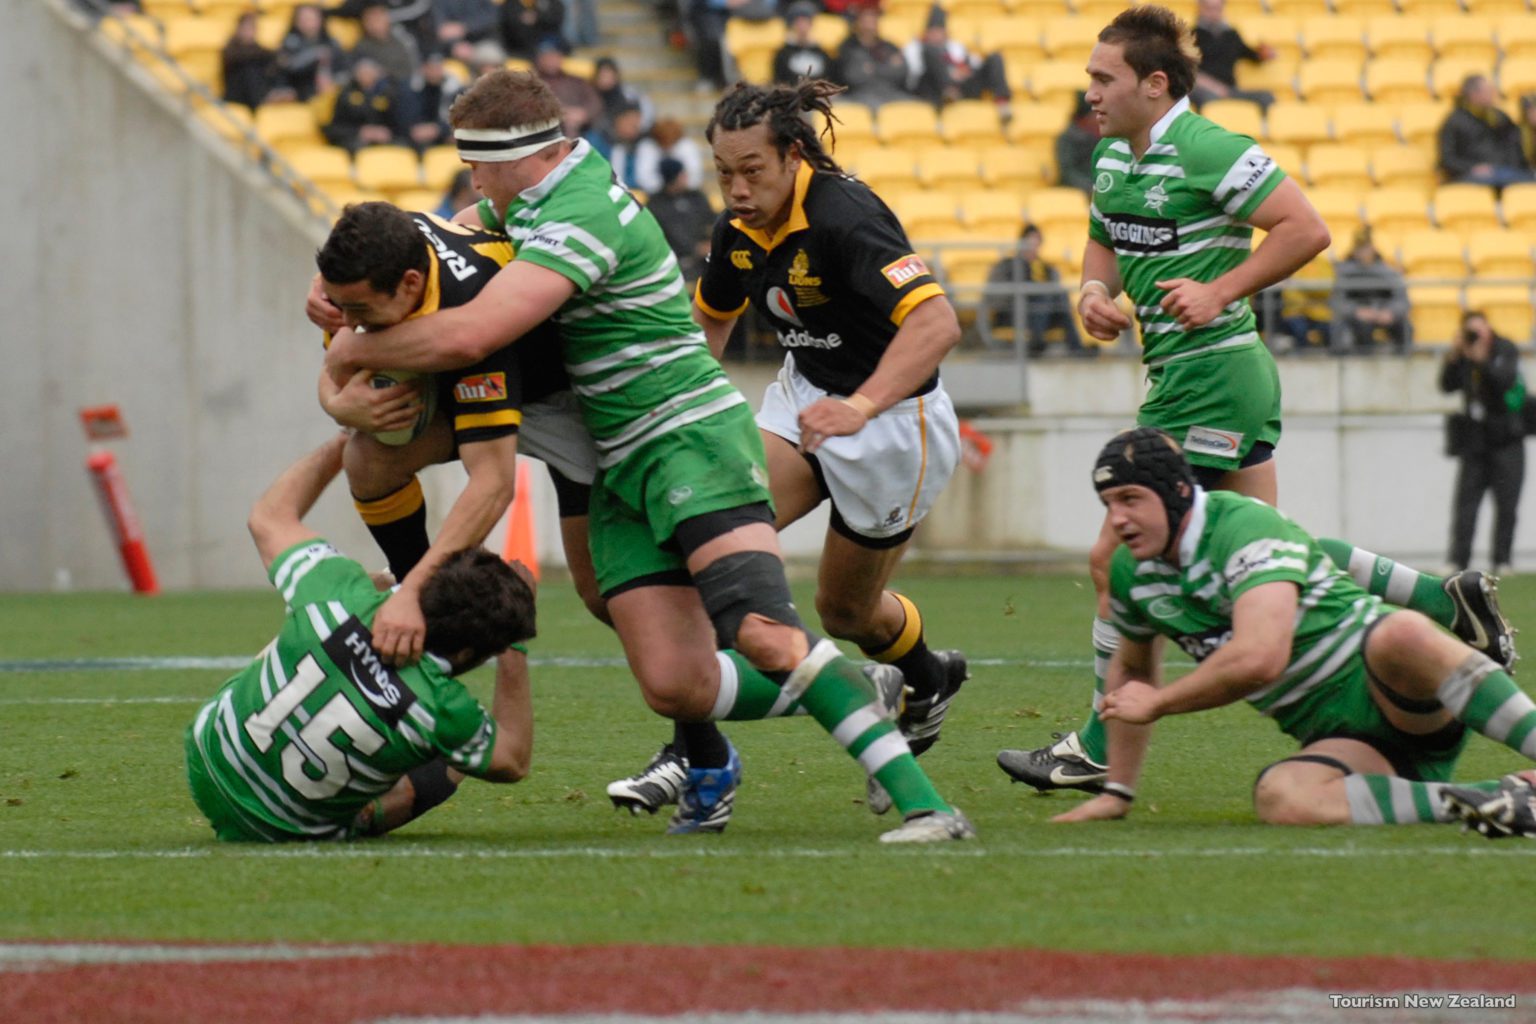 New Zealand's All Black playing at Westpac Stadium in Wellington